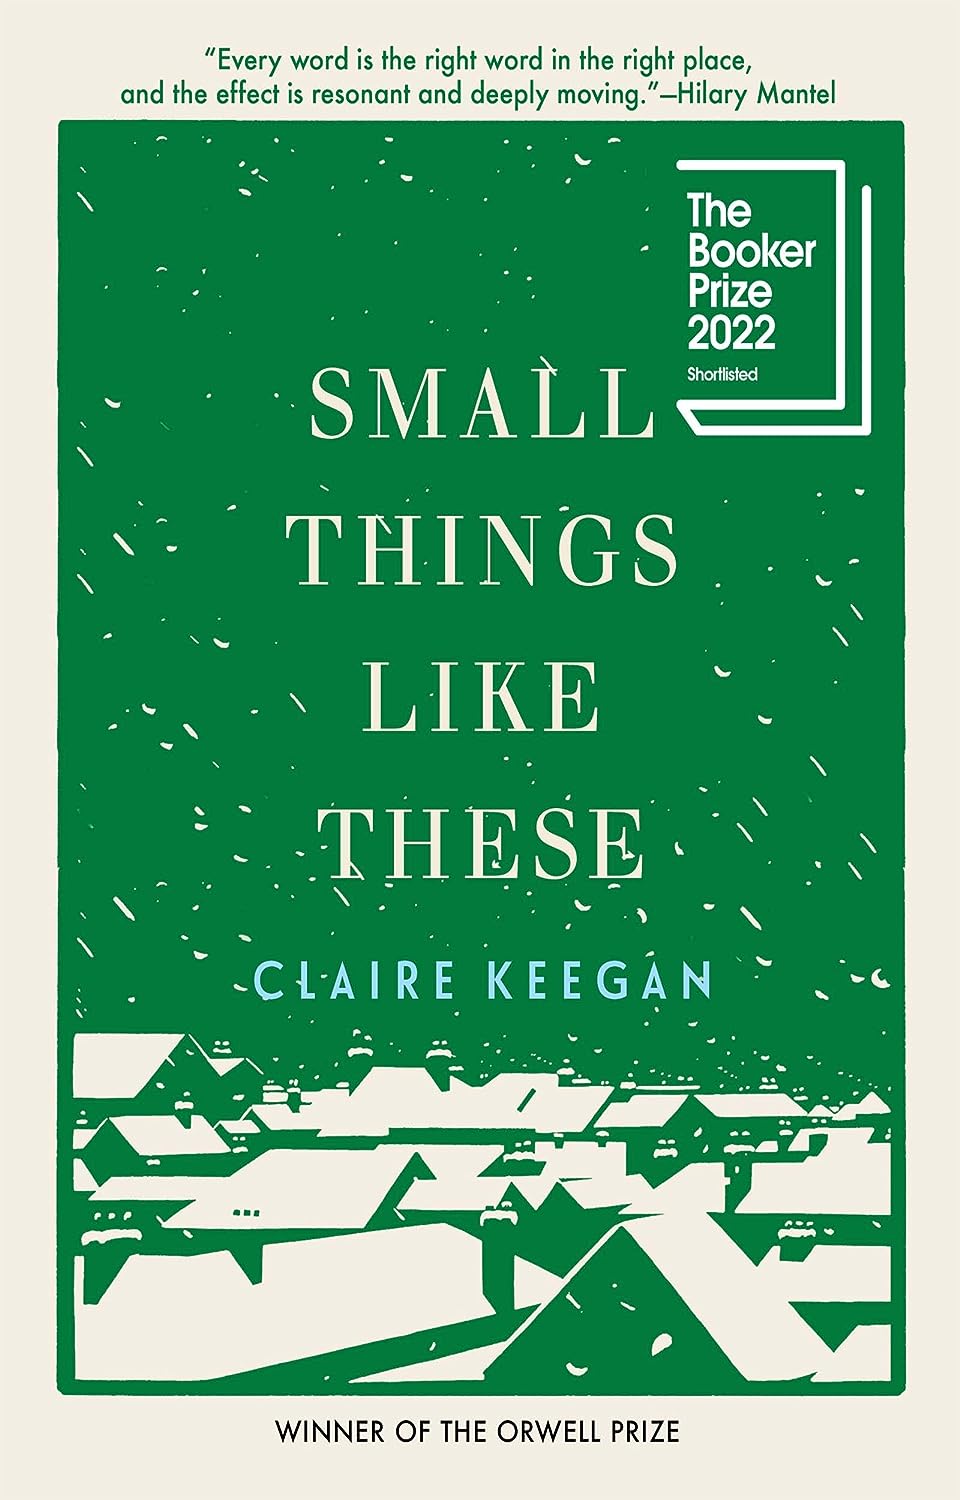 “Small Things Like These” by Claire Keegan